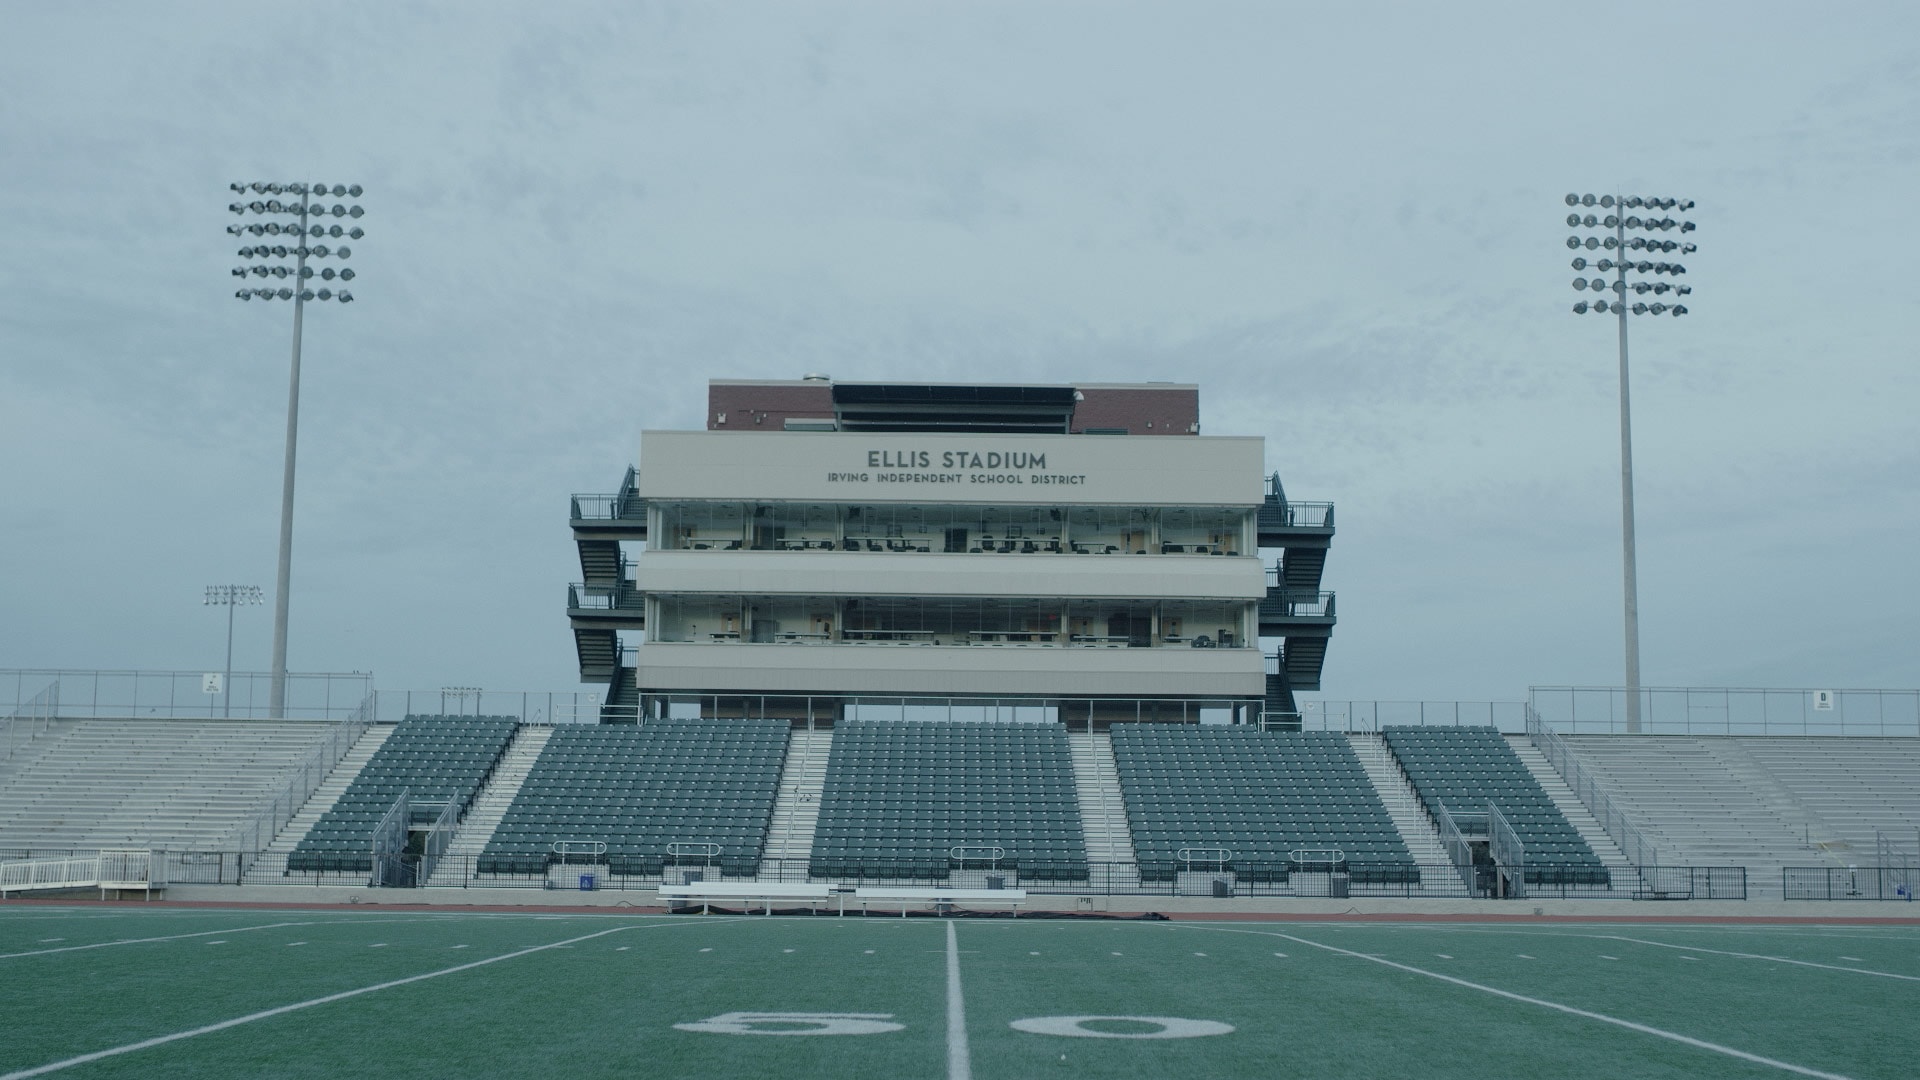 A shot of a football stadium from a branded documentary style video